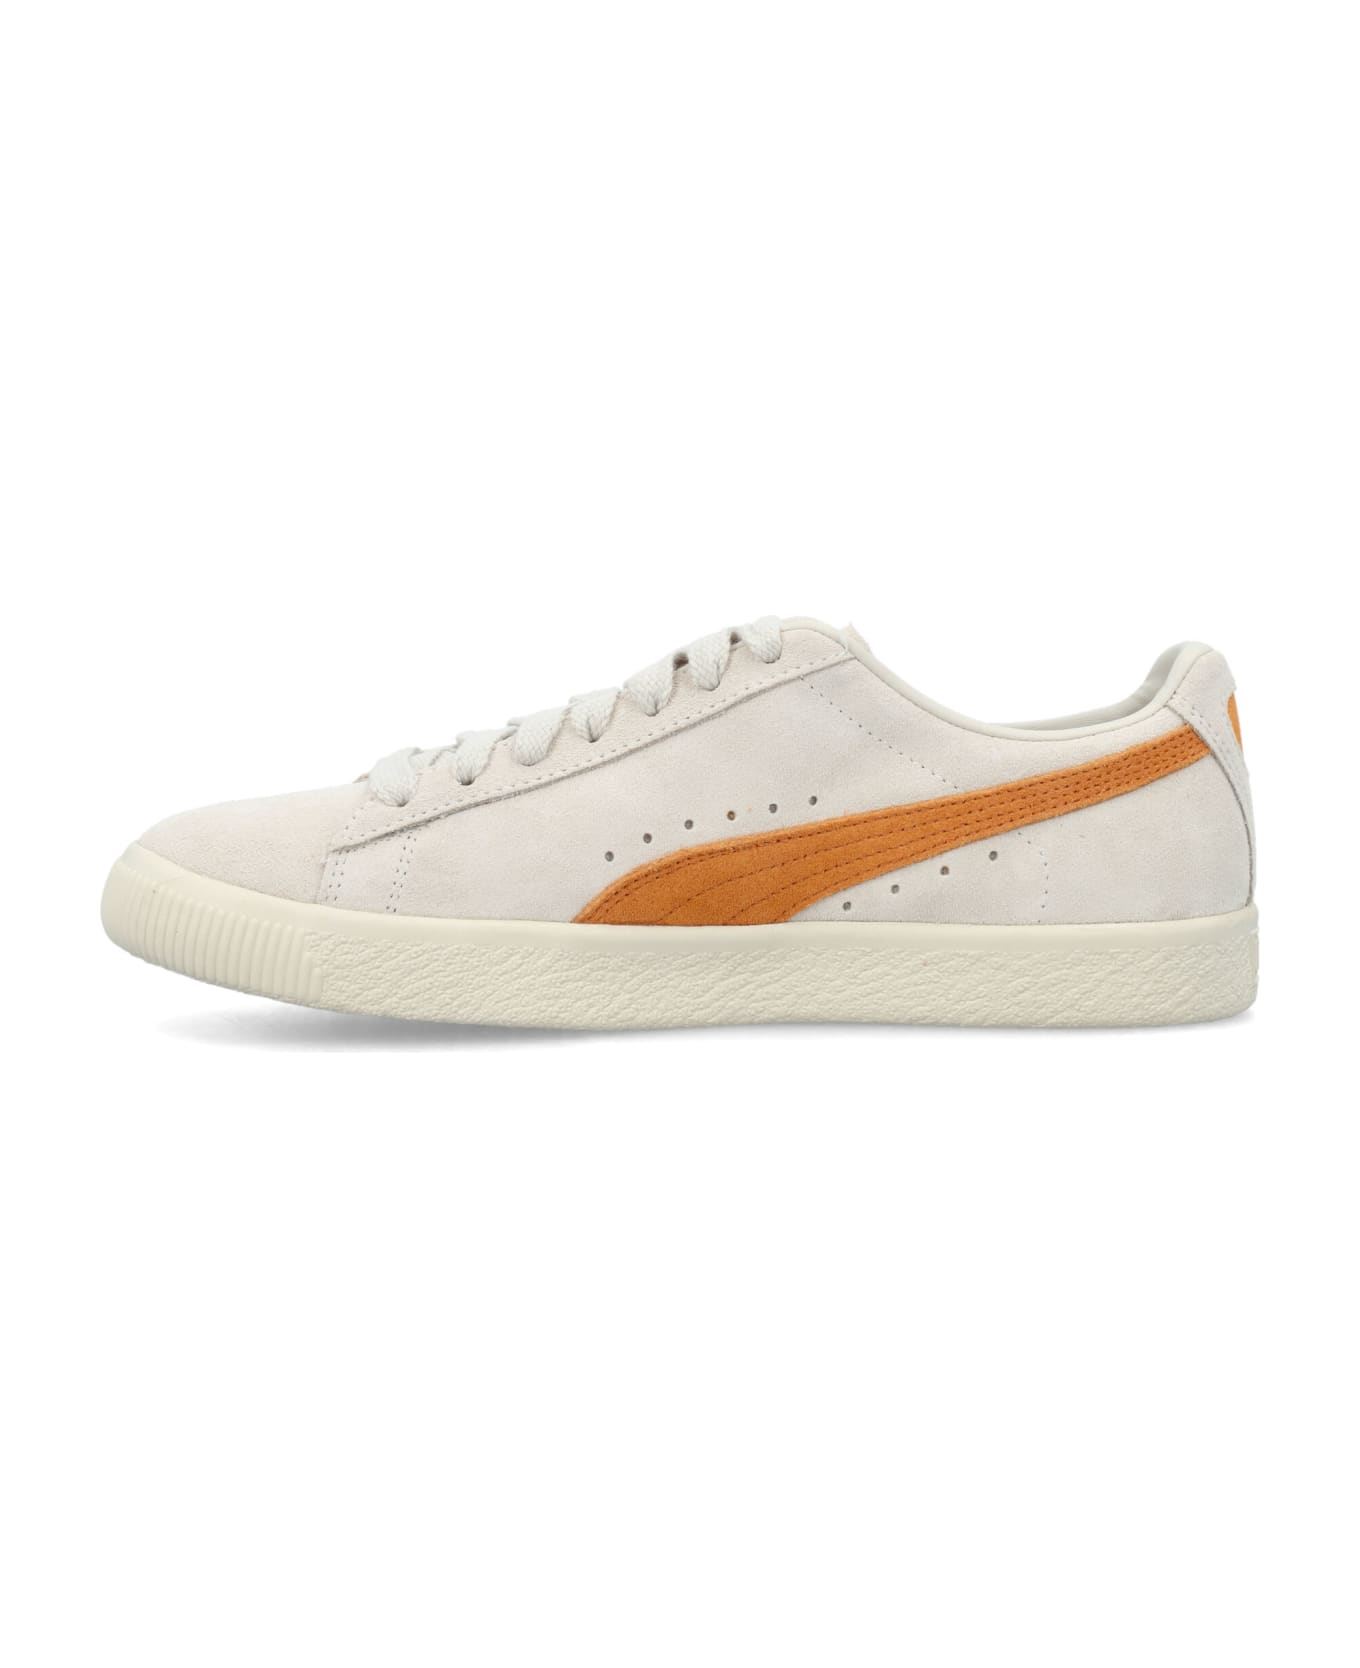 Puma Clyde Og Sneakers - FROSTED IVORY CLEMENTINE スニーカー